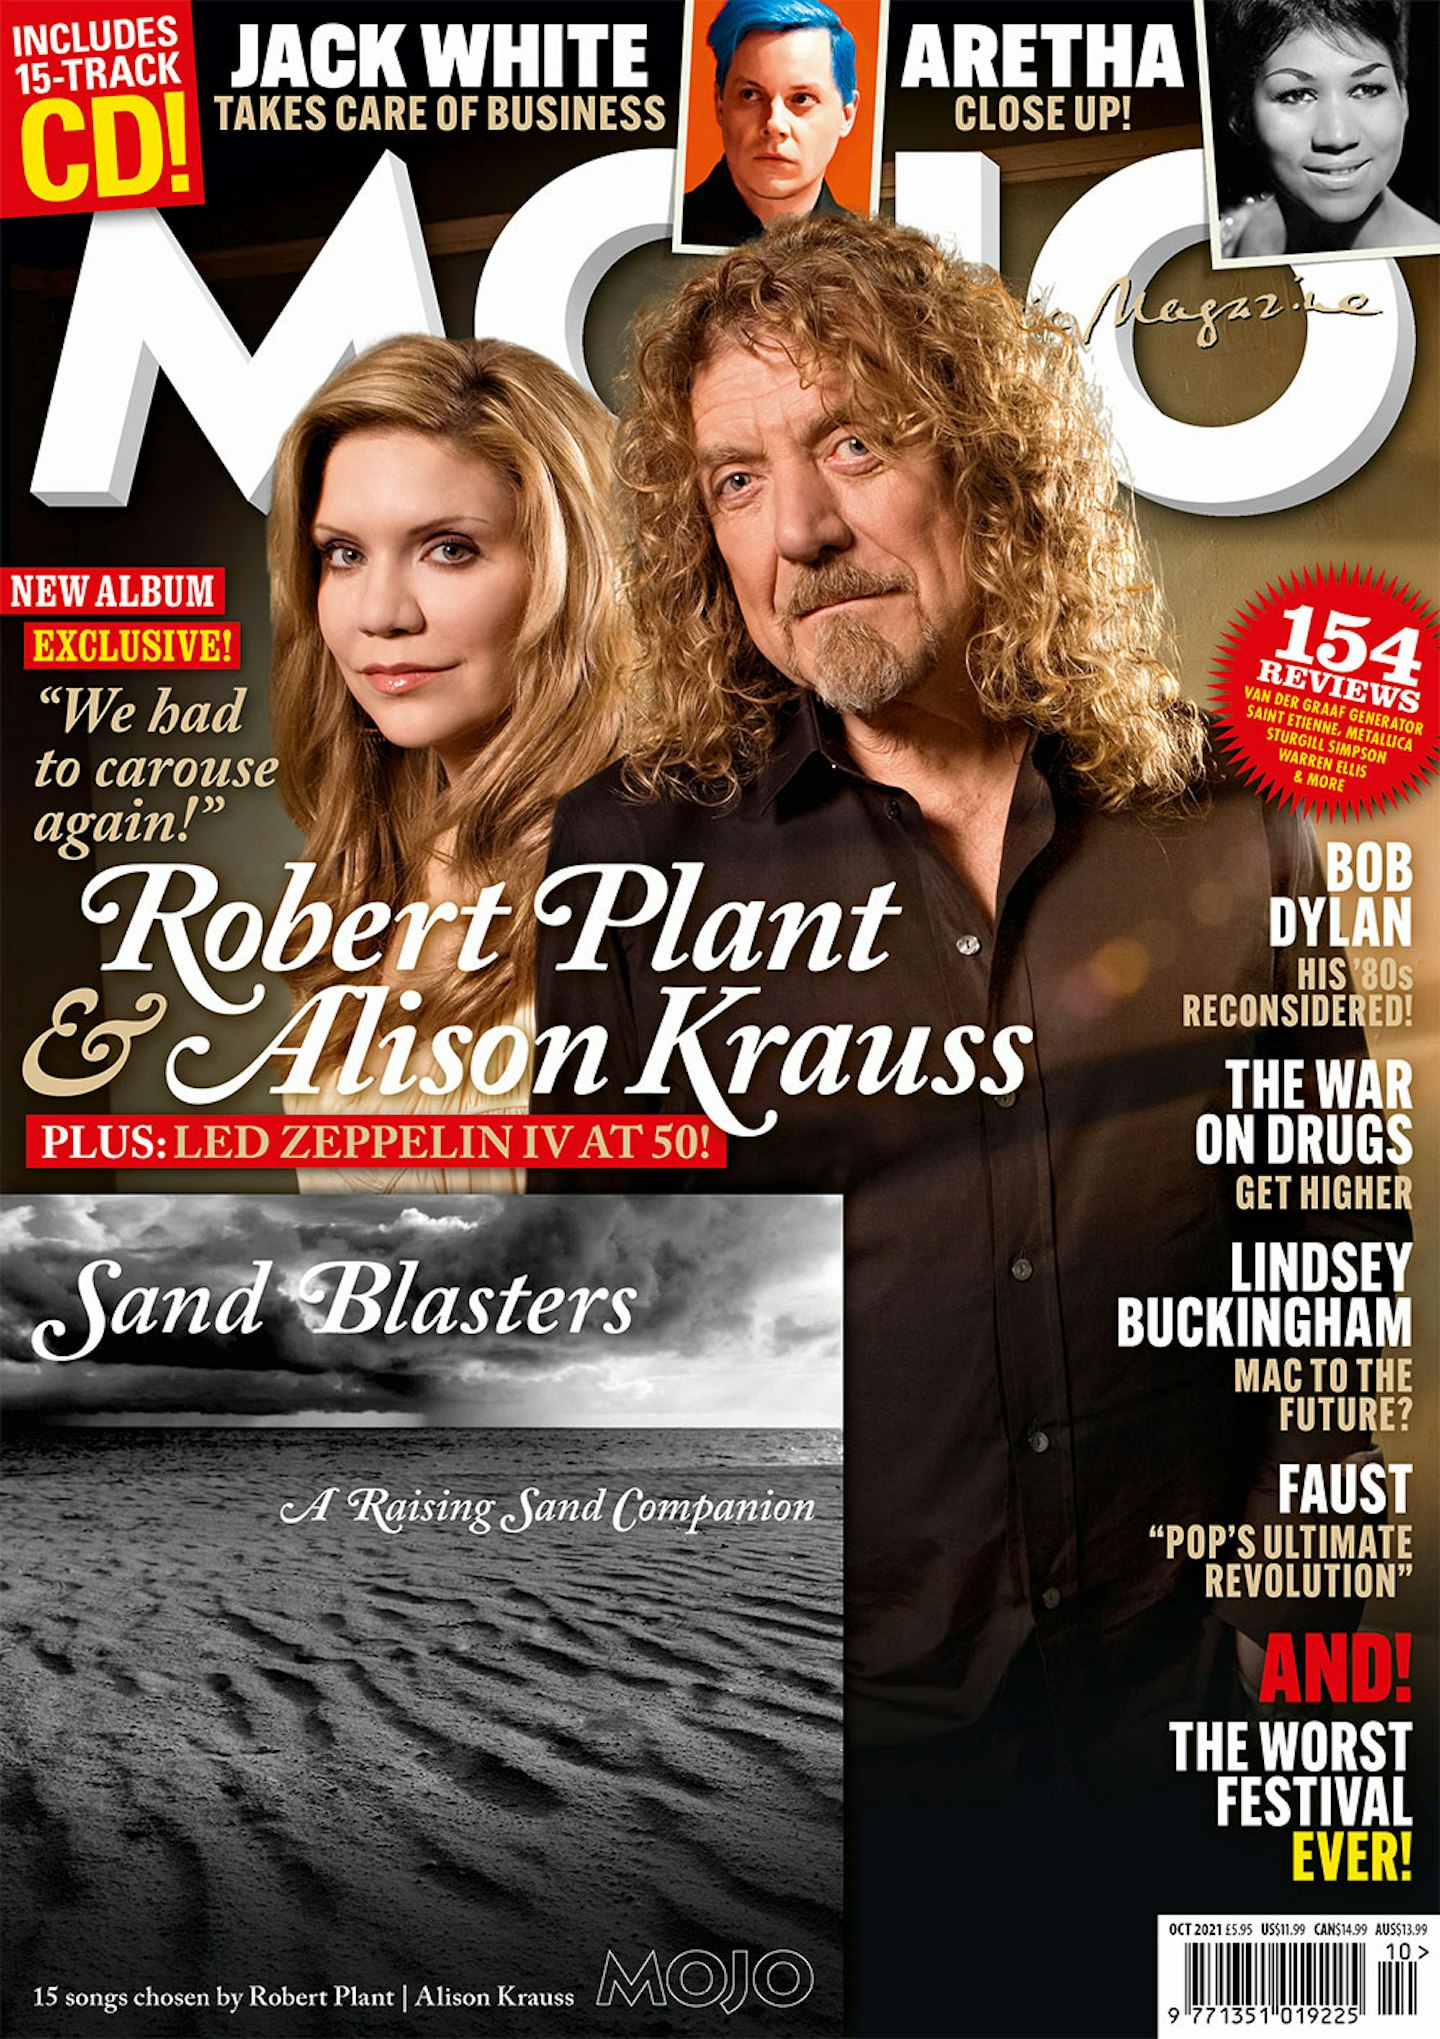 MOJO 335, featuring Robert Plant and Alison Krauss, Jack White, Aretha, Dylan, The War On Drugs and more.